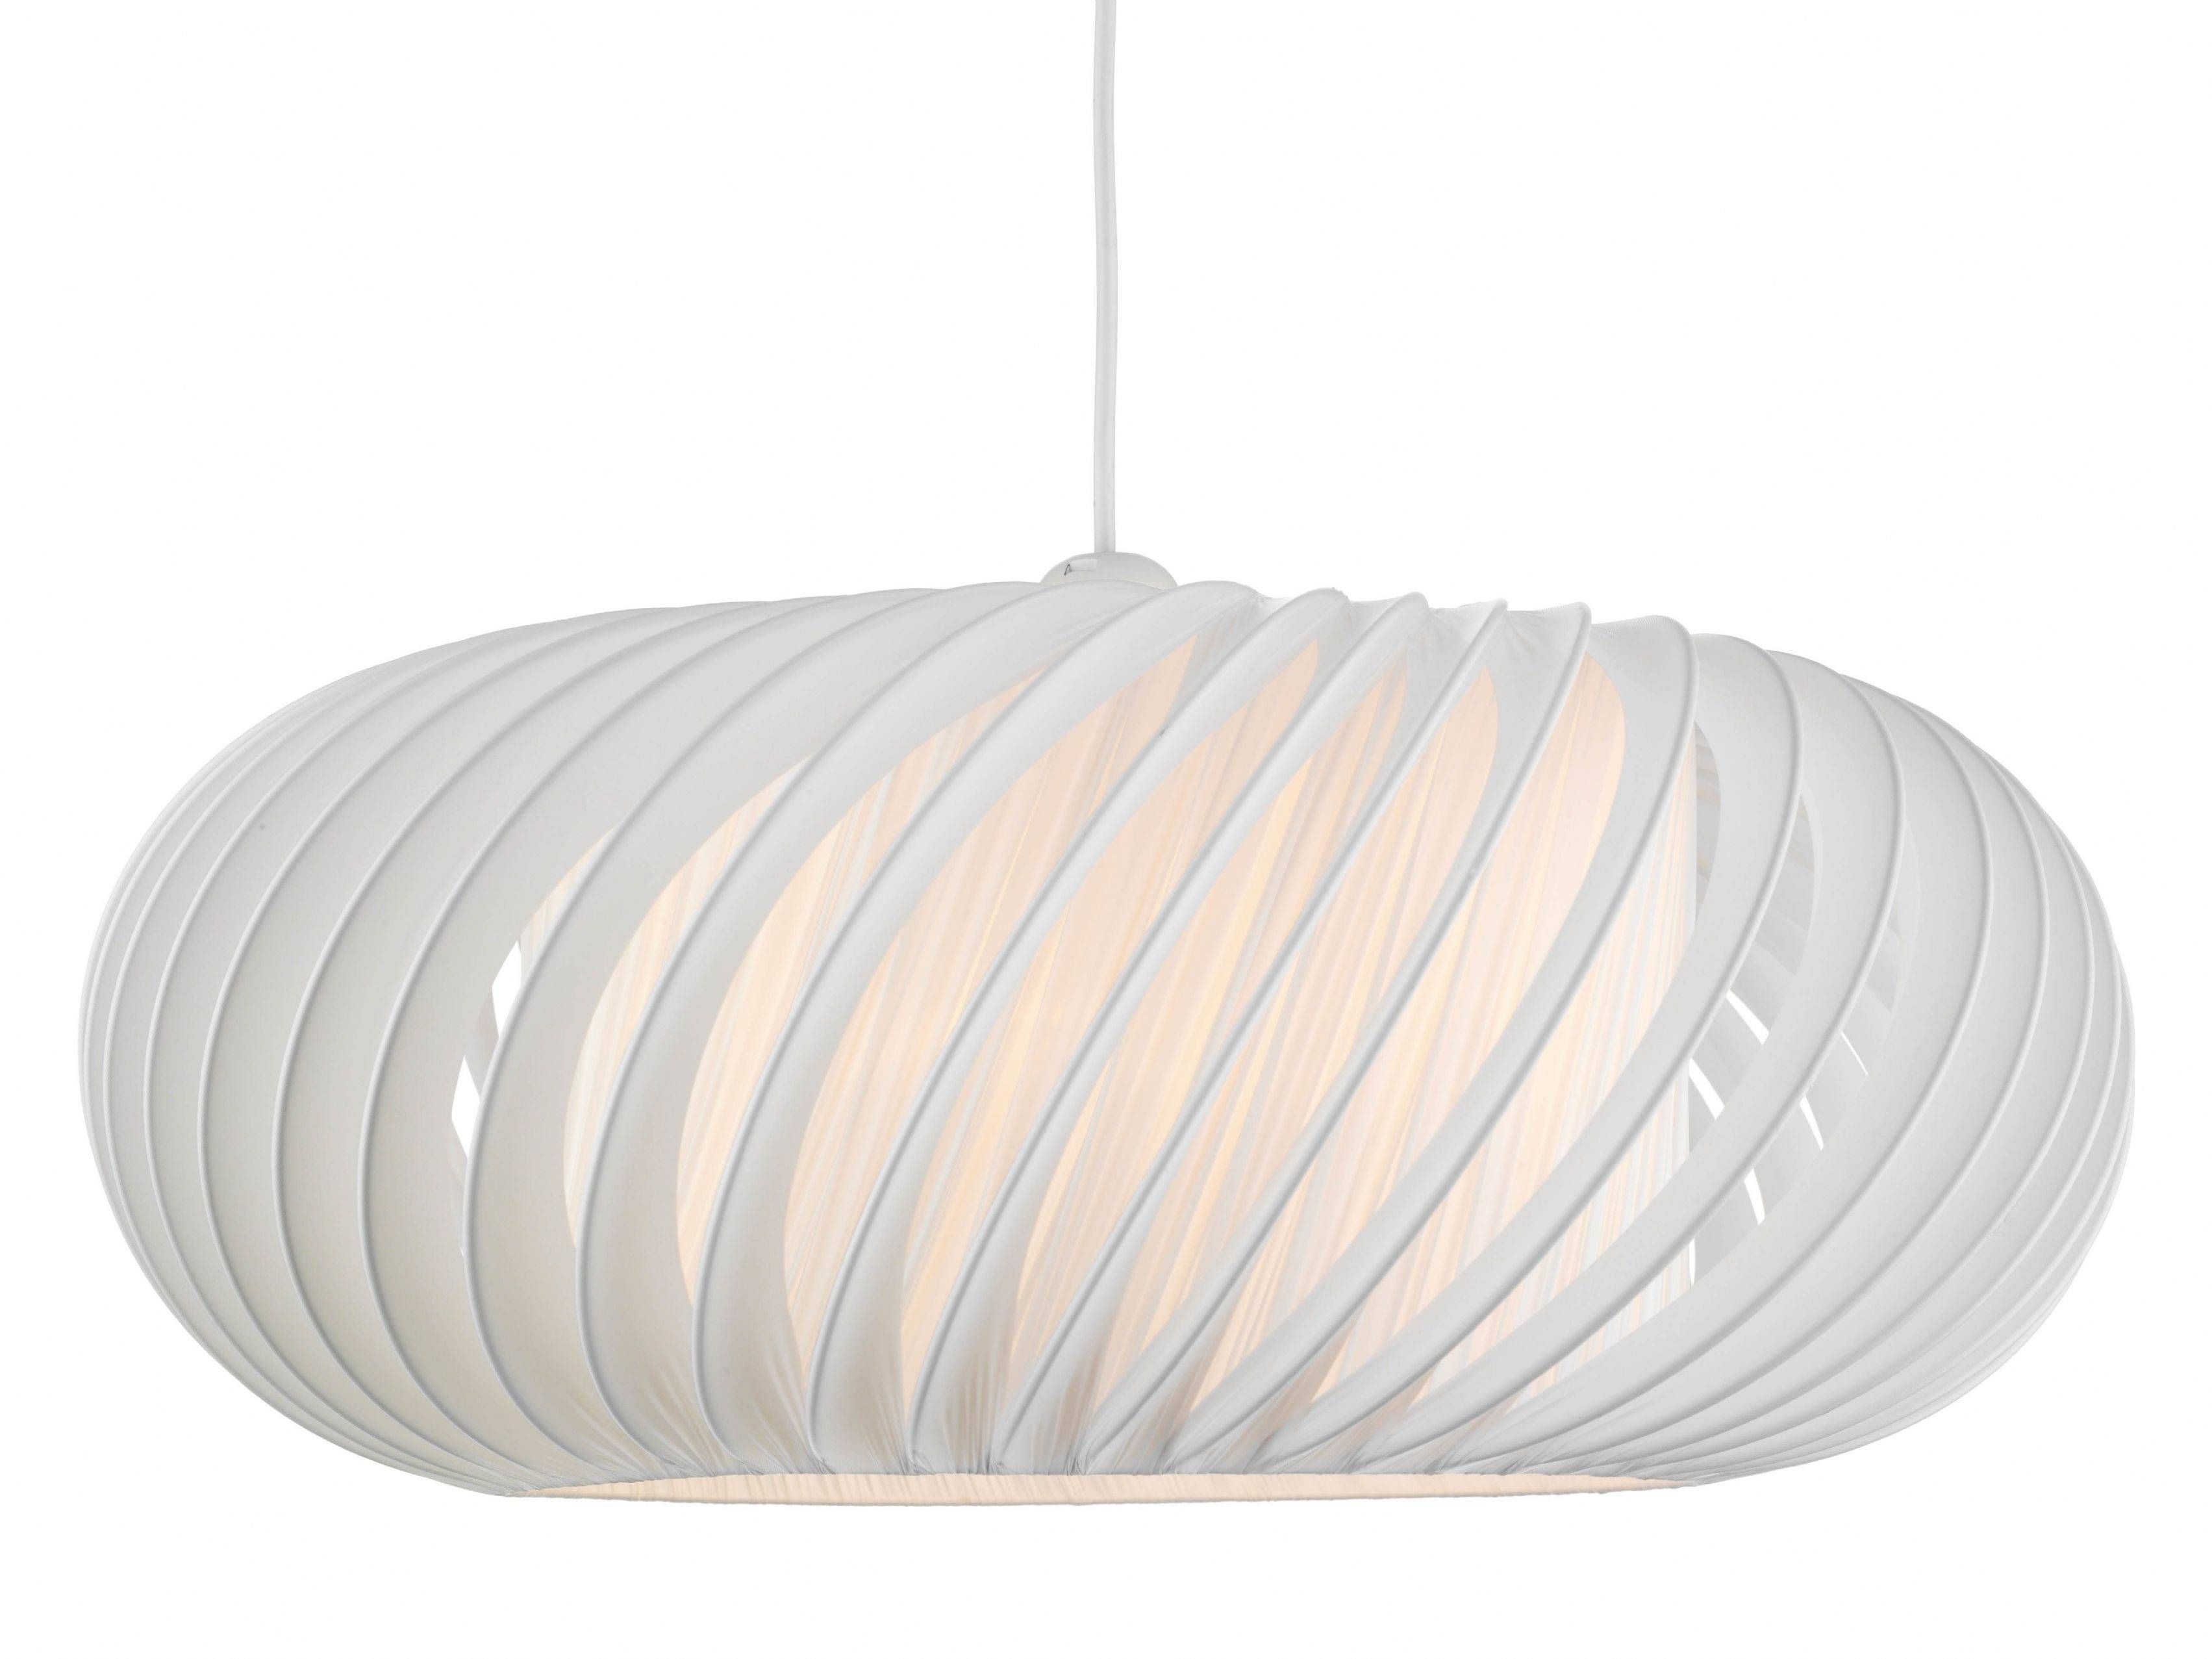 Dar Lighting Explorer Large Slanting Non Electric Pendant – Exp8633 With Regard To Non Electric Pendant Ceiling Lights (View 4 of 15)